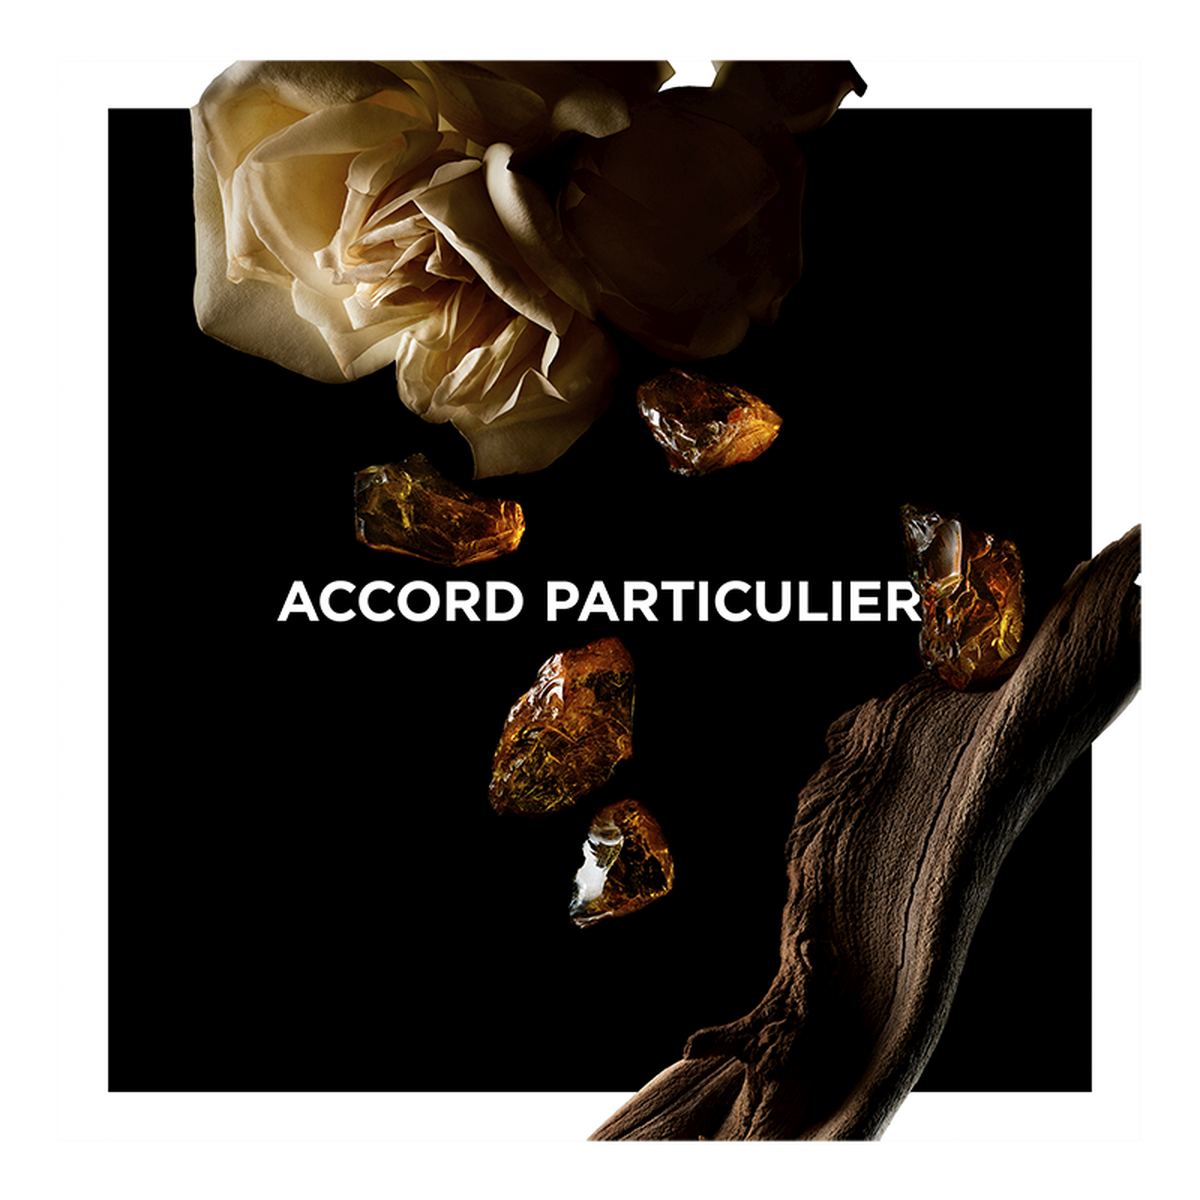 ACCORD PARTICULIER